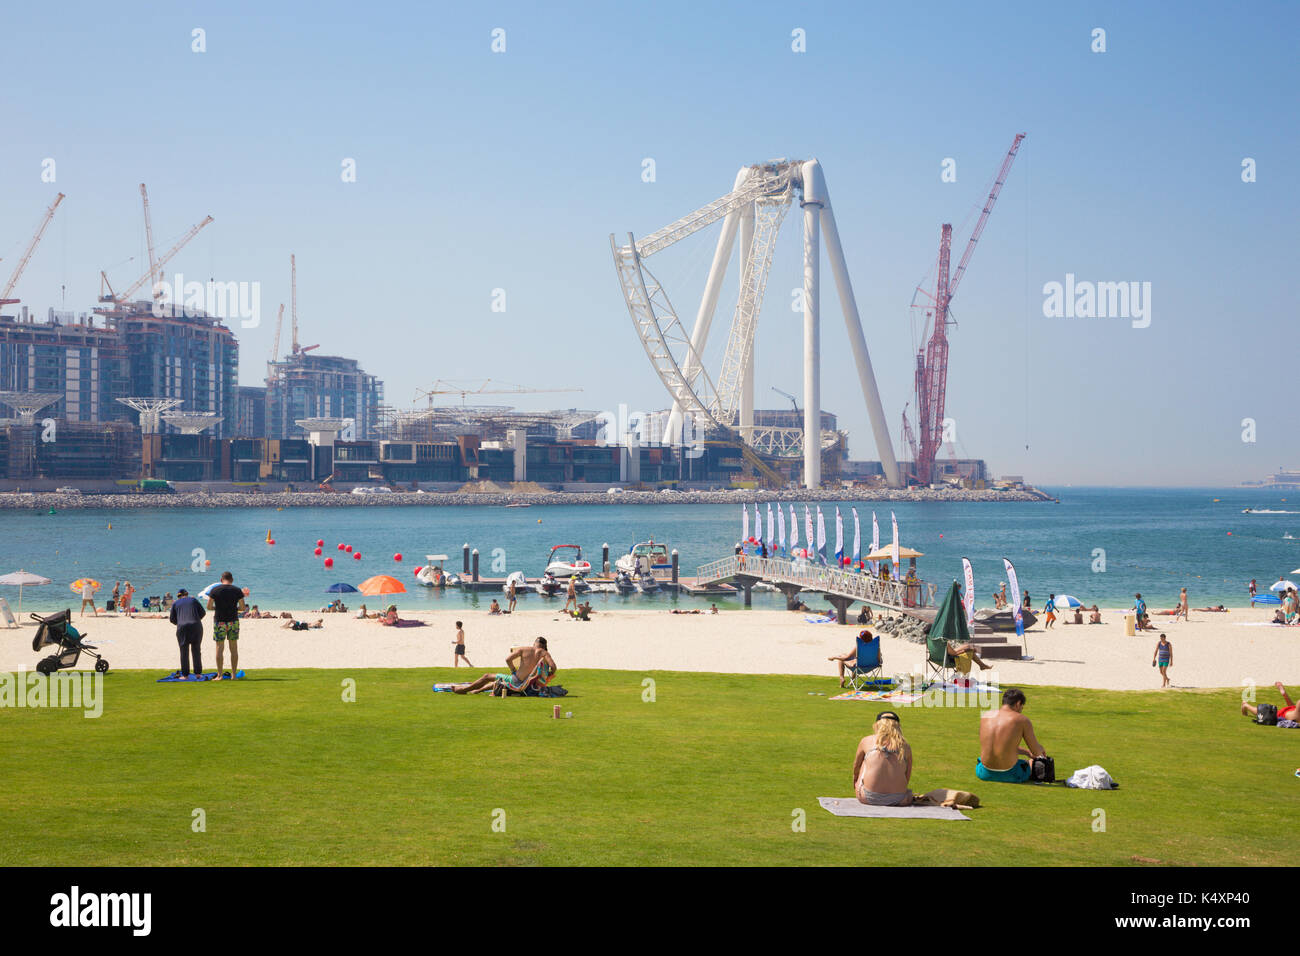 DUBAI, UAE - APRIL 1, 2017: The worlds largest Ferris wheel under construction and the beach. Stock Photo